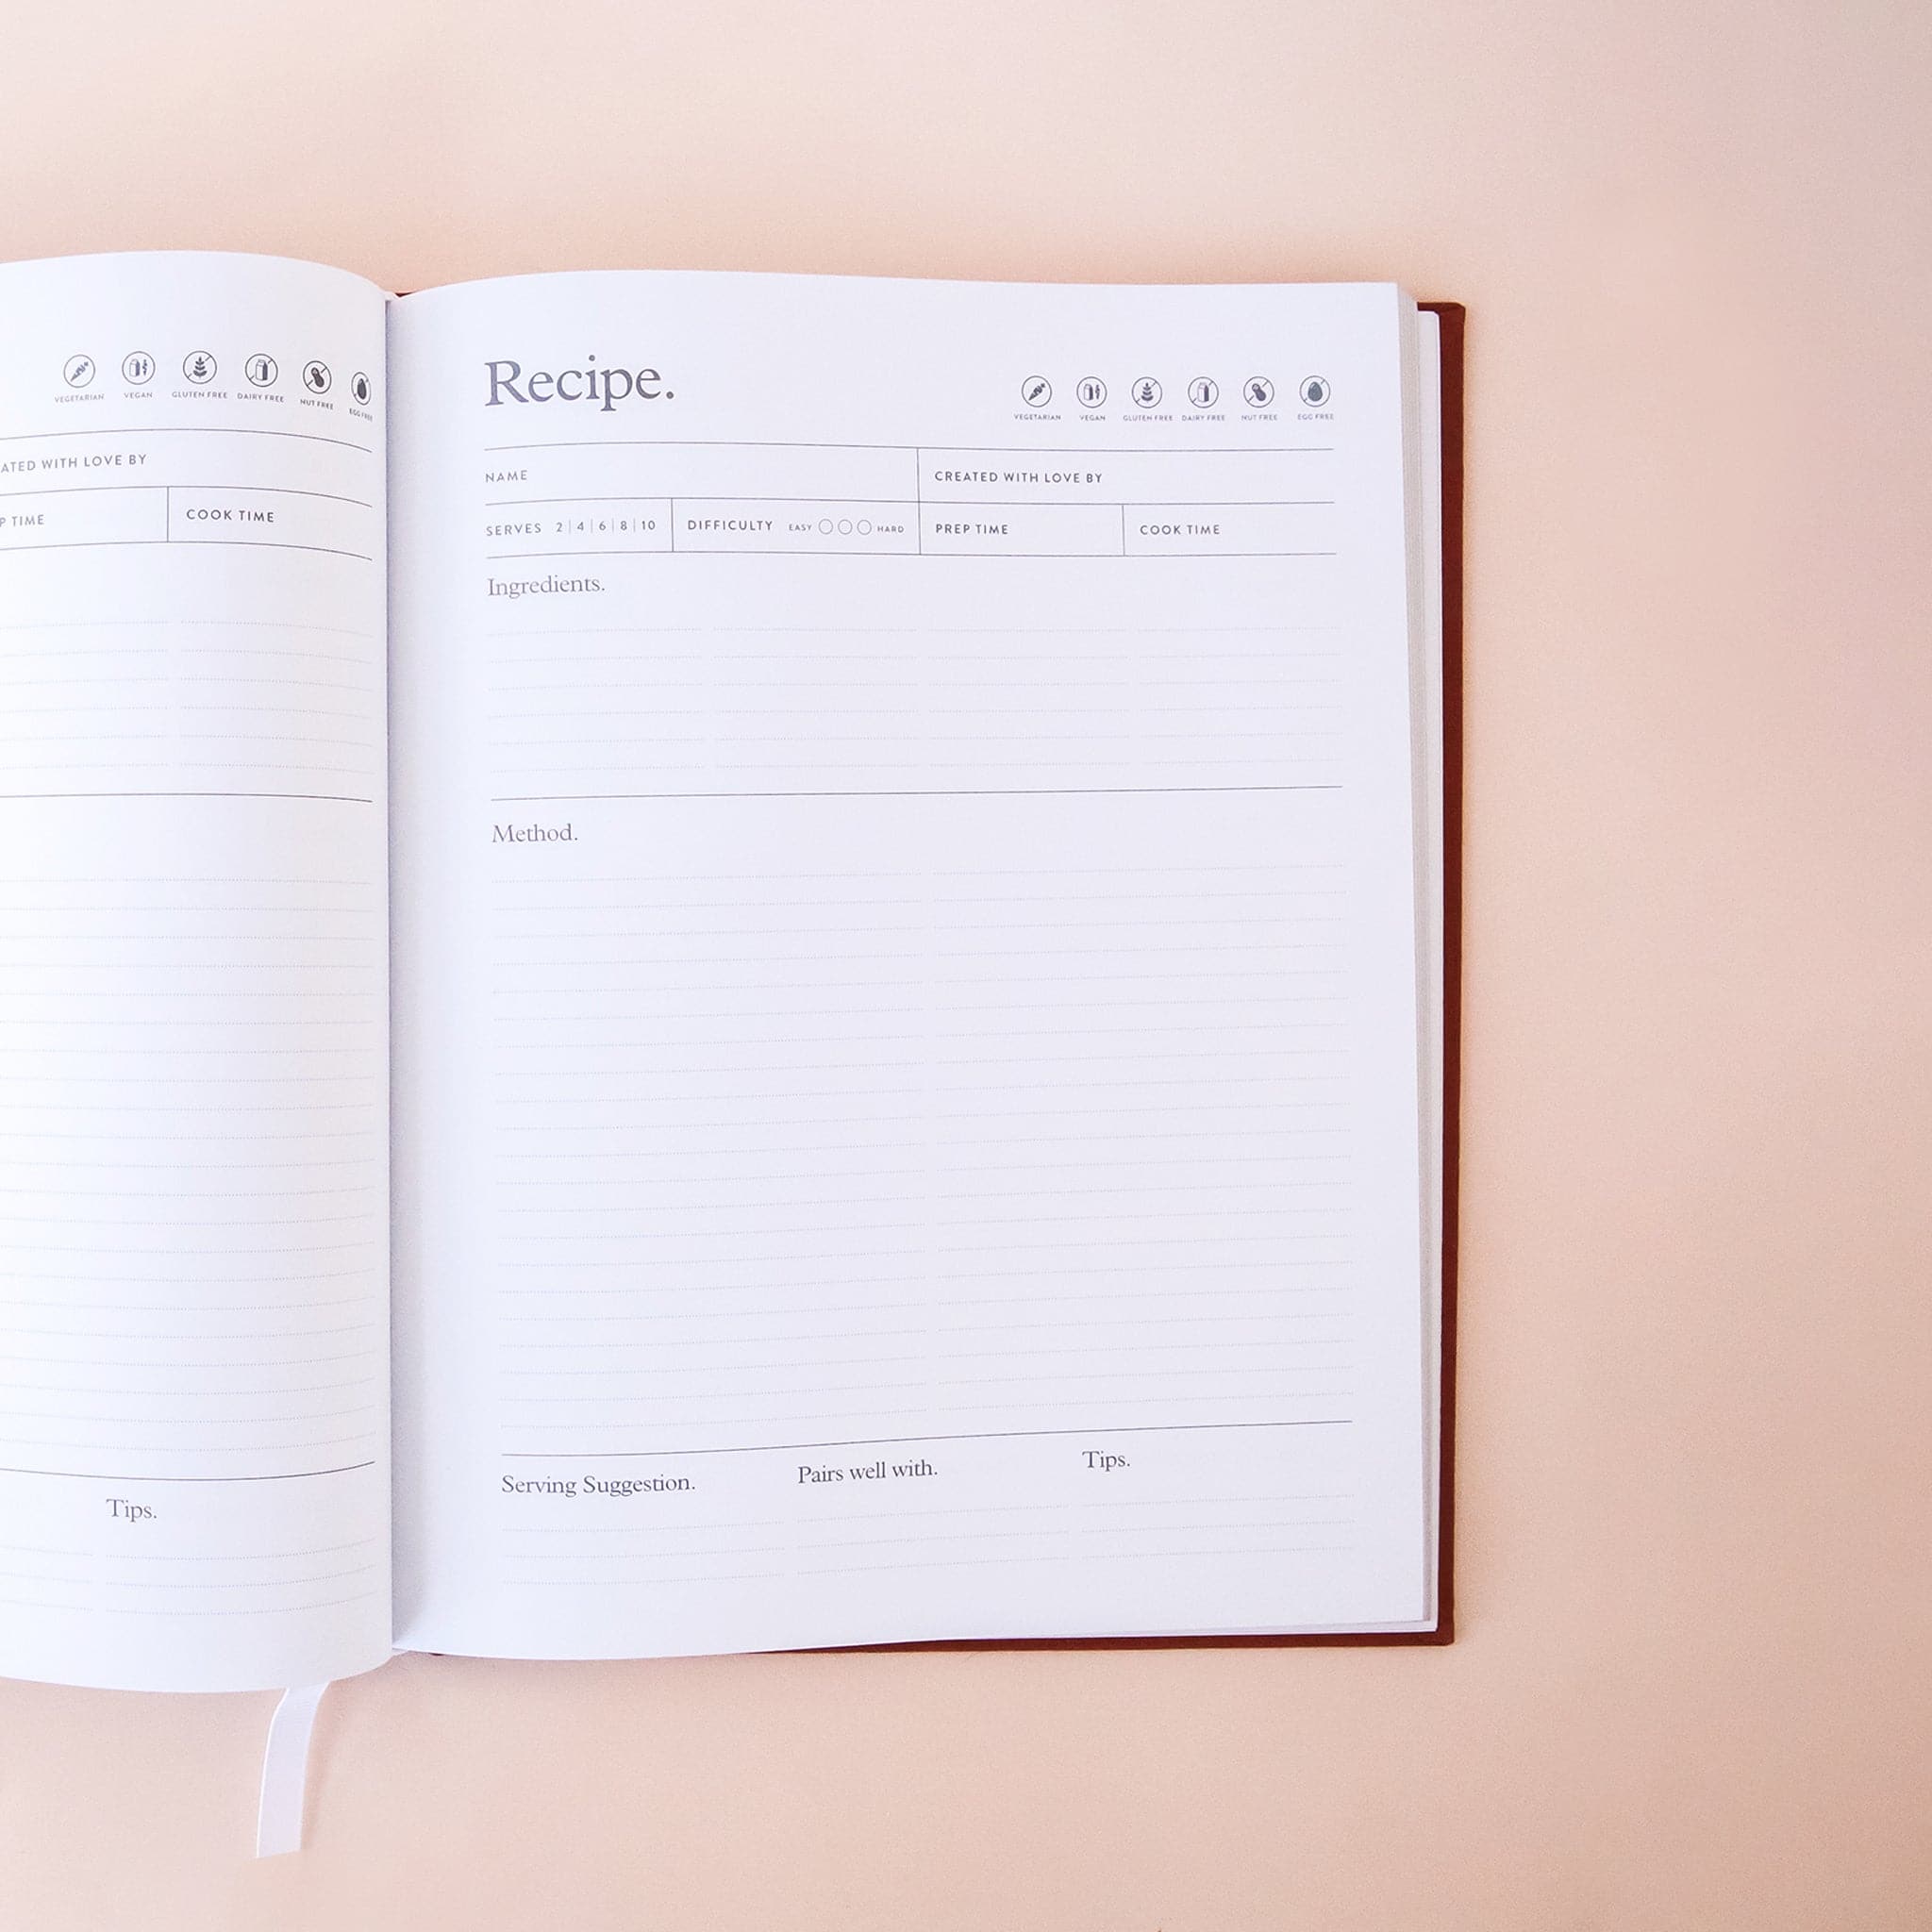 A look inside the recipe book featuring handy cooking guide charts for temperatures, volumes, weights and cup measures. Space for dietary requirements, serving size, difficulty as well as serving and pairing suggestions.